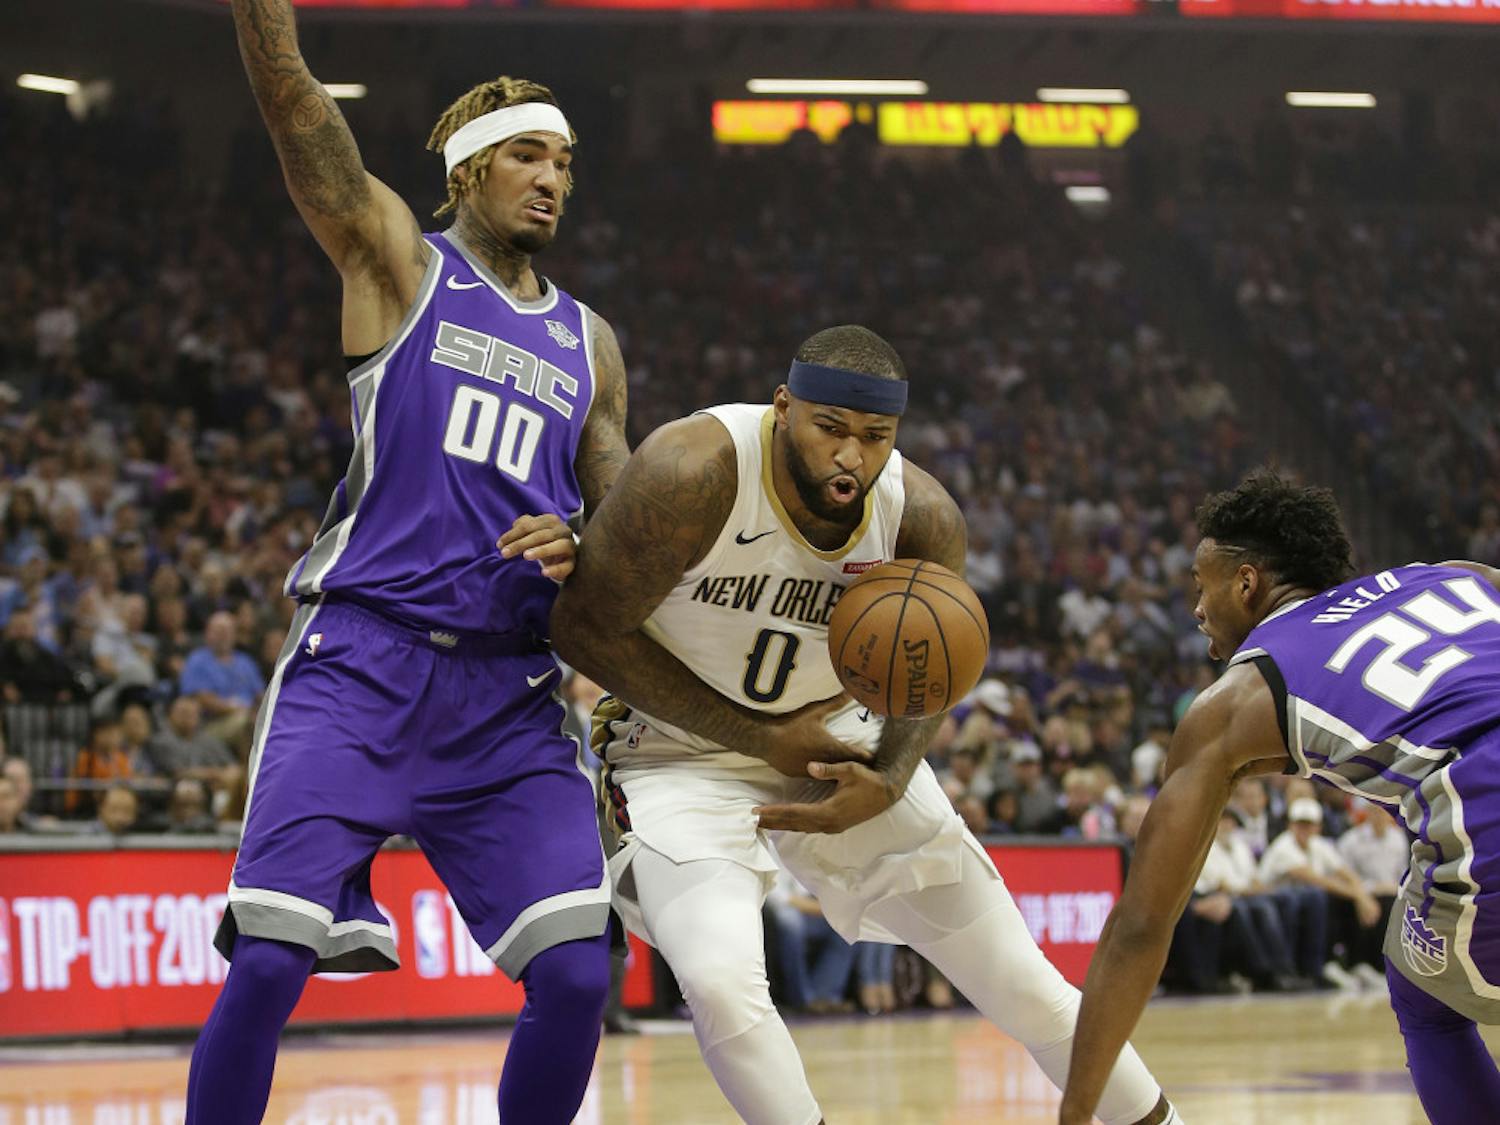 Sacramento Kings guard Buddy Hield, right, hits the ball out of the hands of New Orleans Pelicans forward DeMarcus Cousins, center, as Kings center Willie Cauley-Stein defends during the first quarter of an NBA basketball game Thursday, Oct. 26, 2017, in Sacramento, Calif. (AP Photo/Rich Pedroncelli)